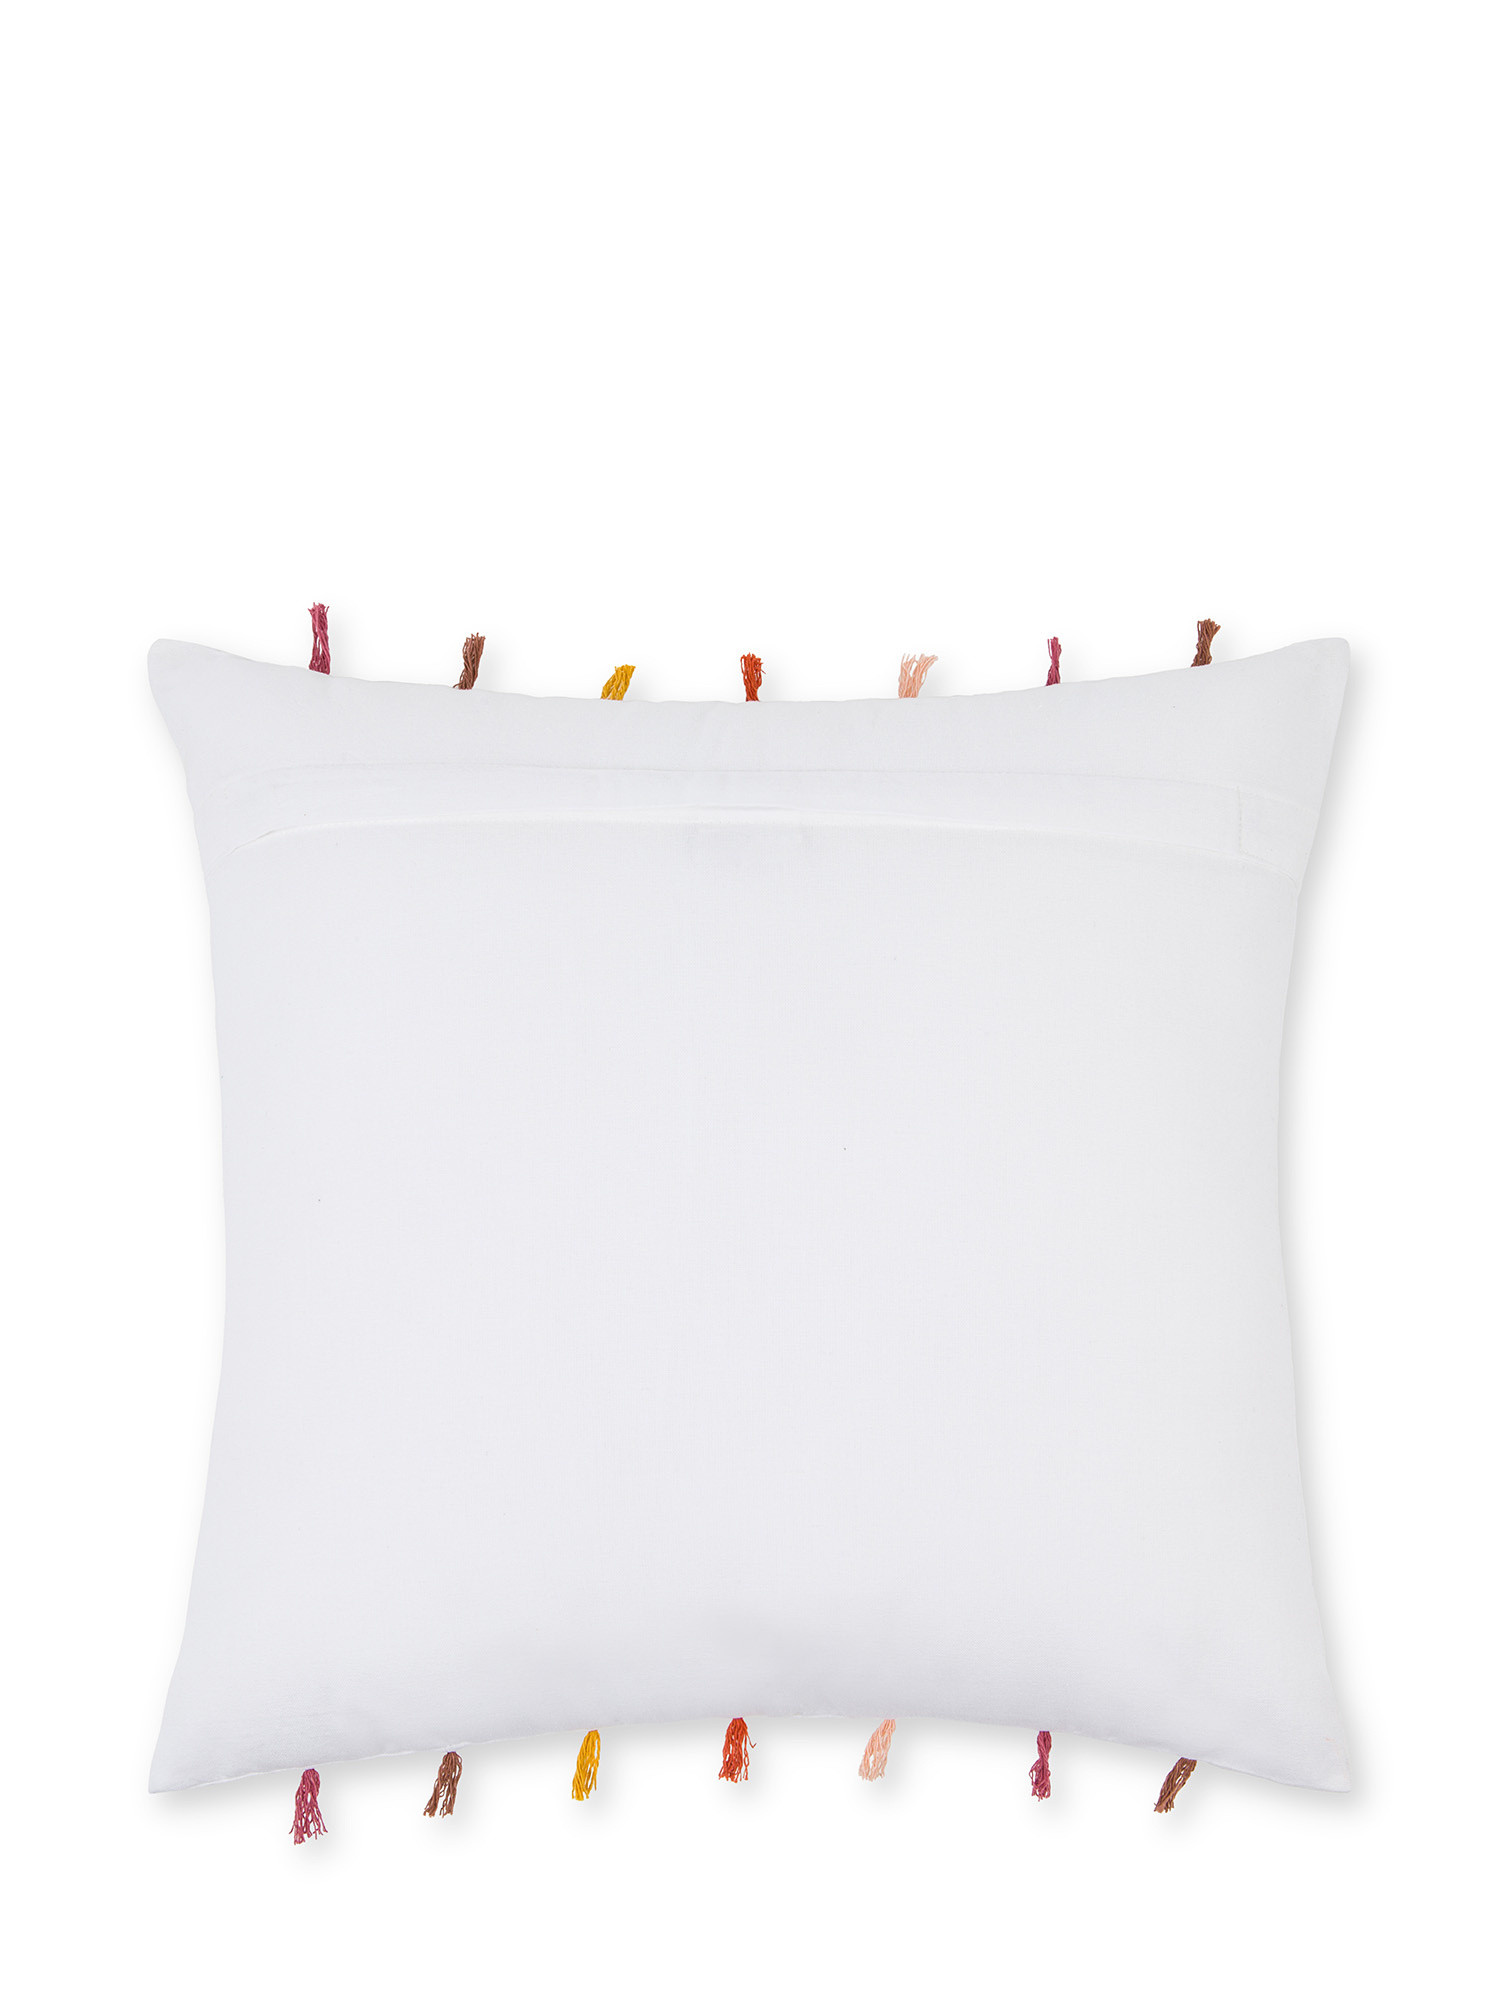 Cotton cushion with chain stitch embroidery and fringes 45x45cm, Multicolor, large image number 1